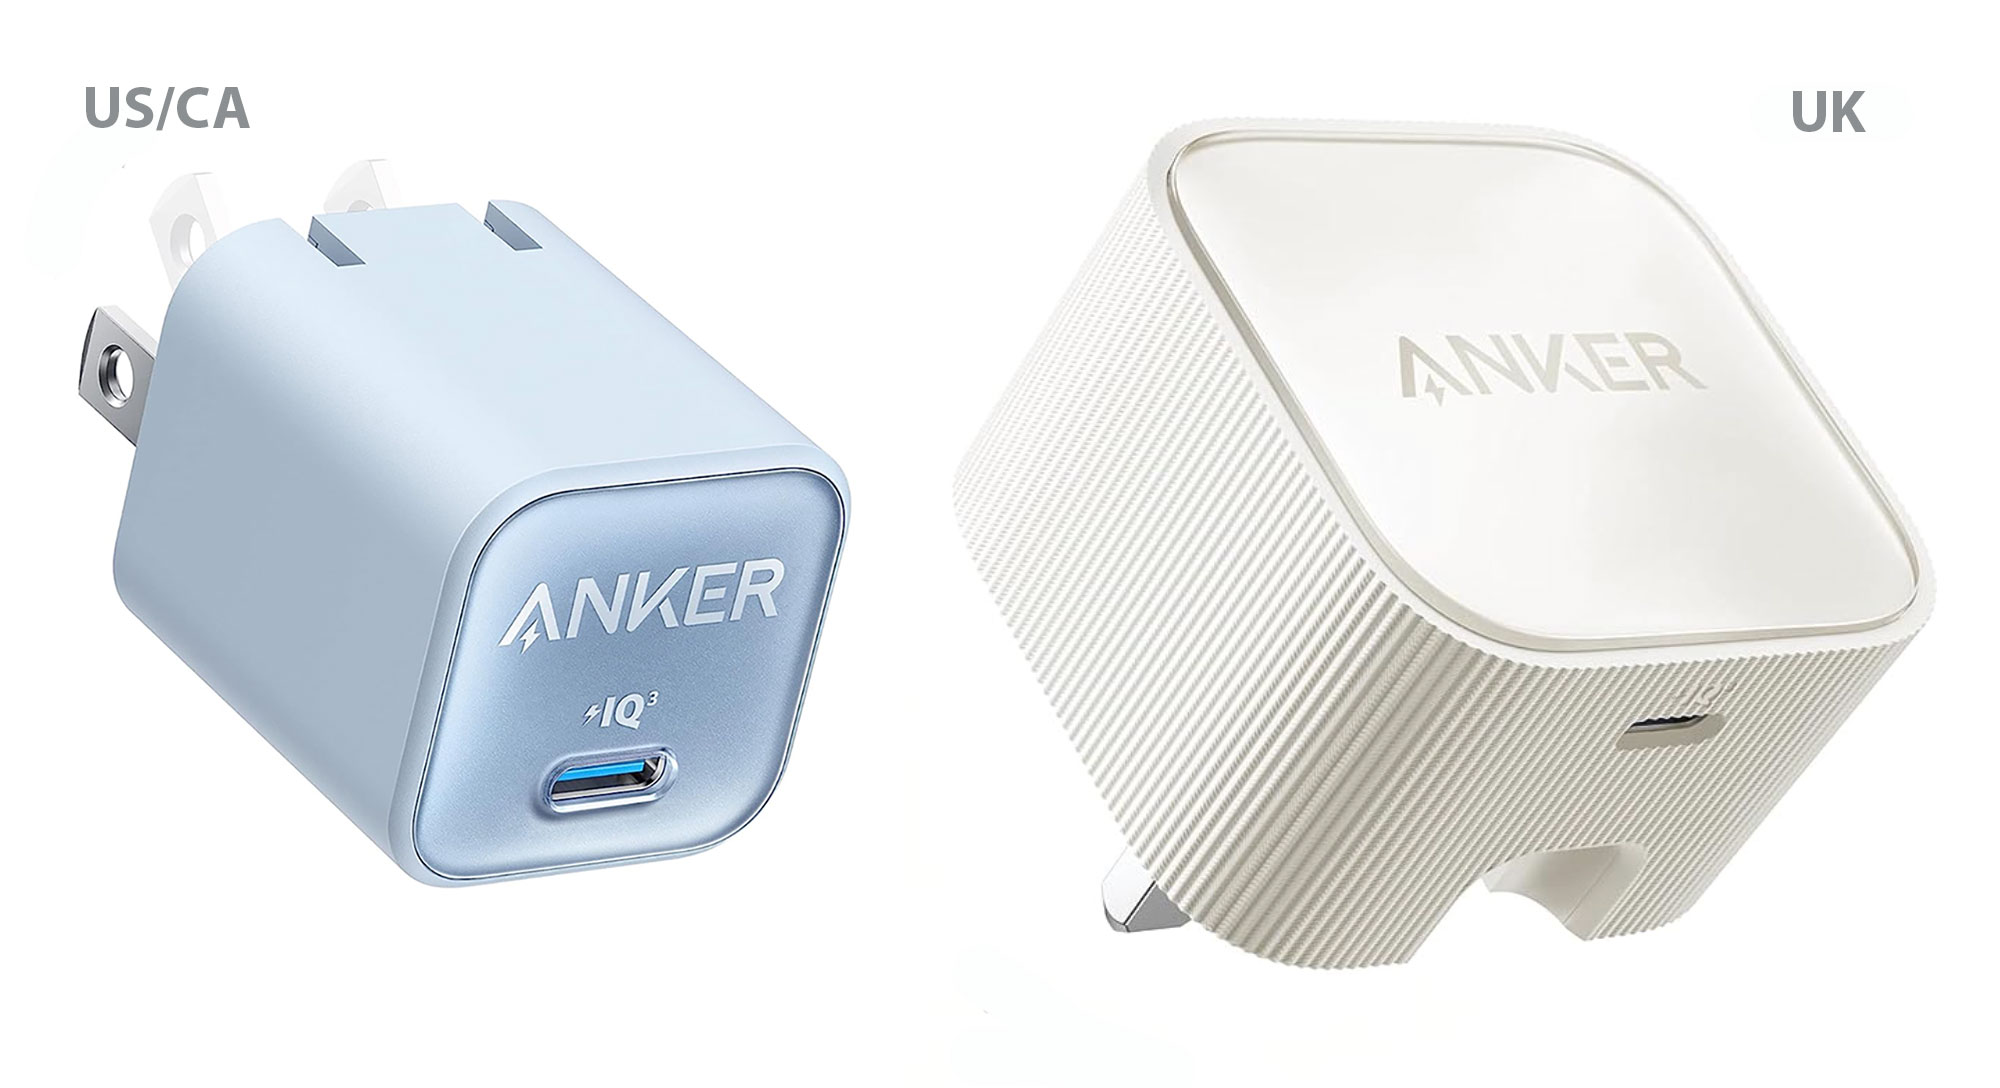 Best single-port iPhone charger: Anker 30W Nano Charger